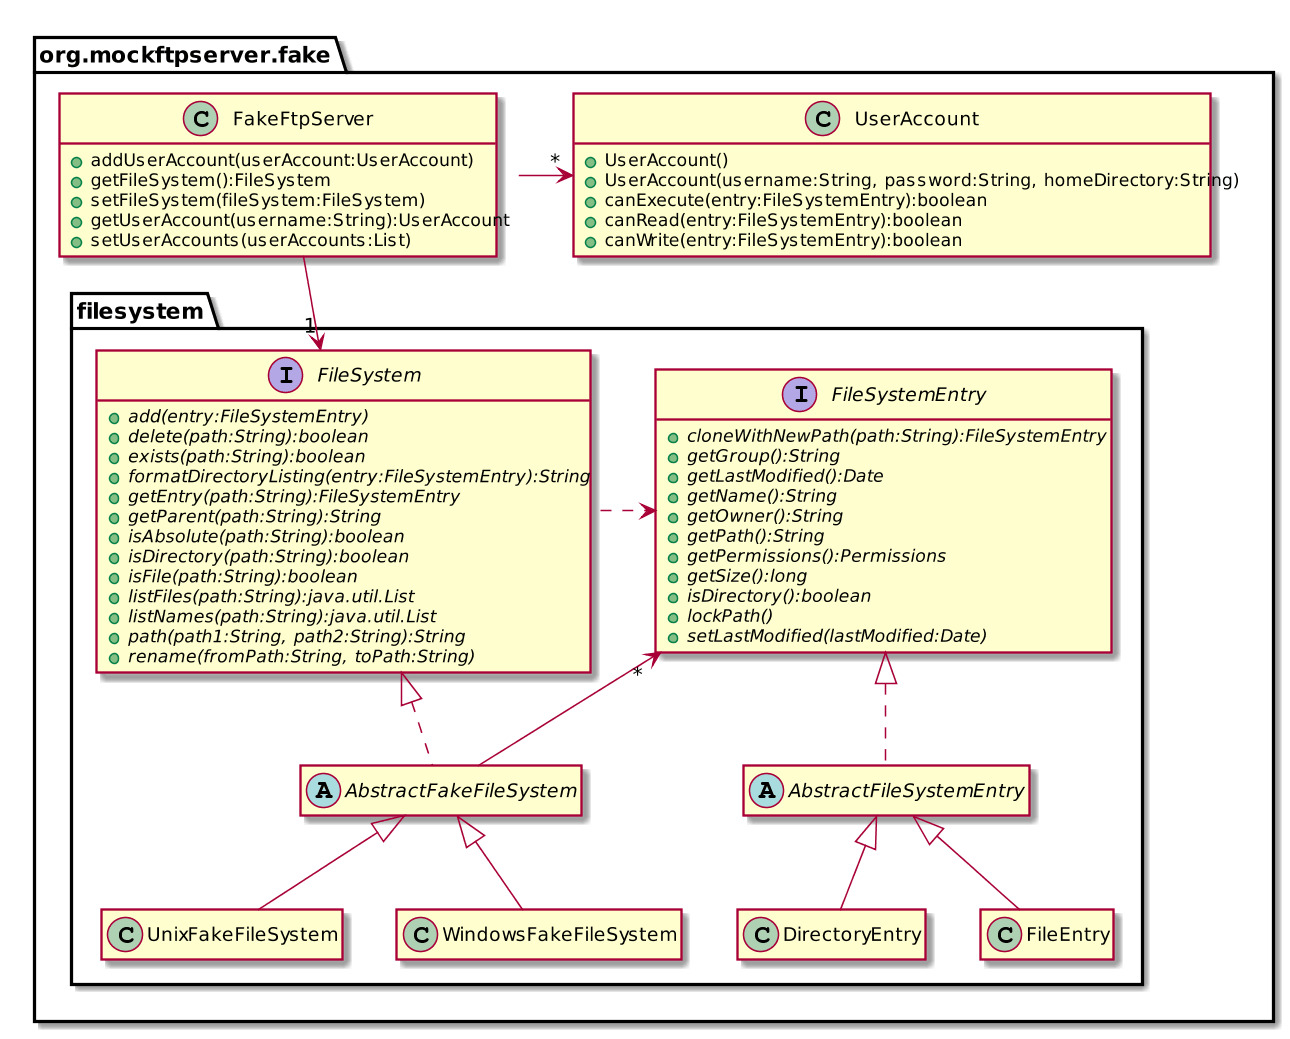 Fig. 5.11 - Fake FTP server class hierarchy